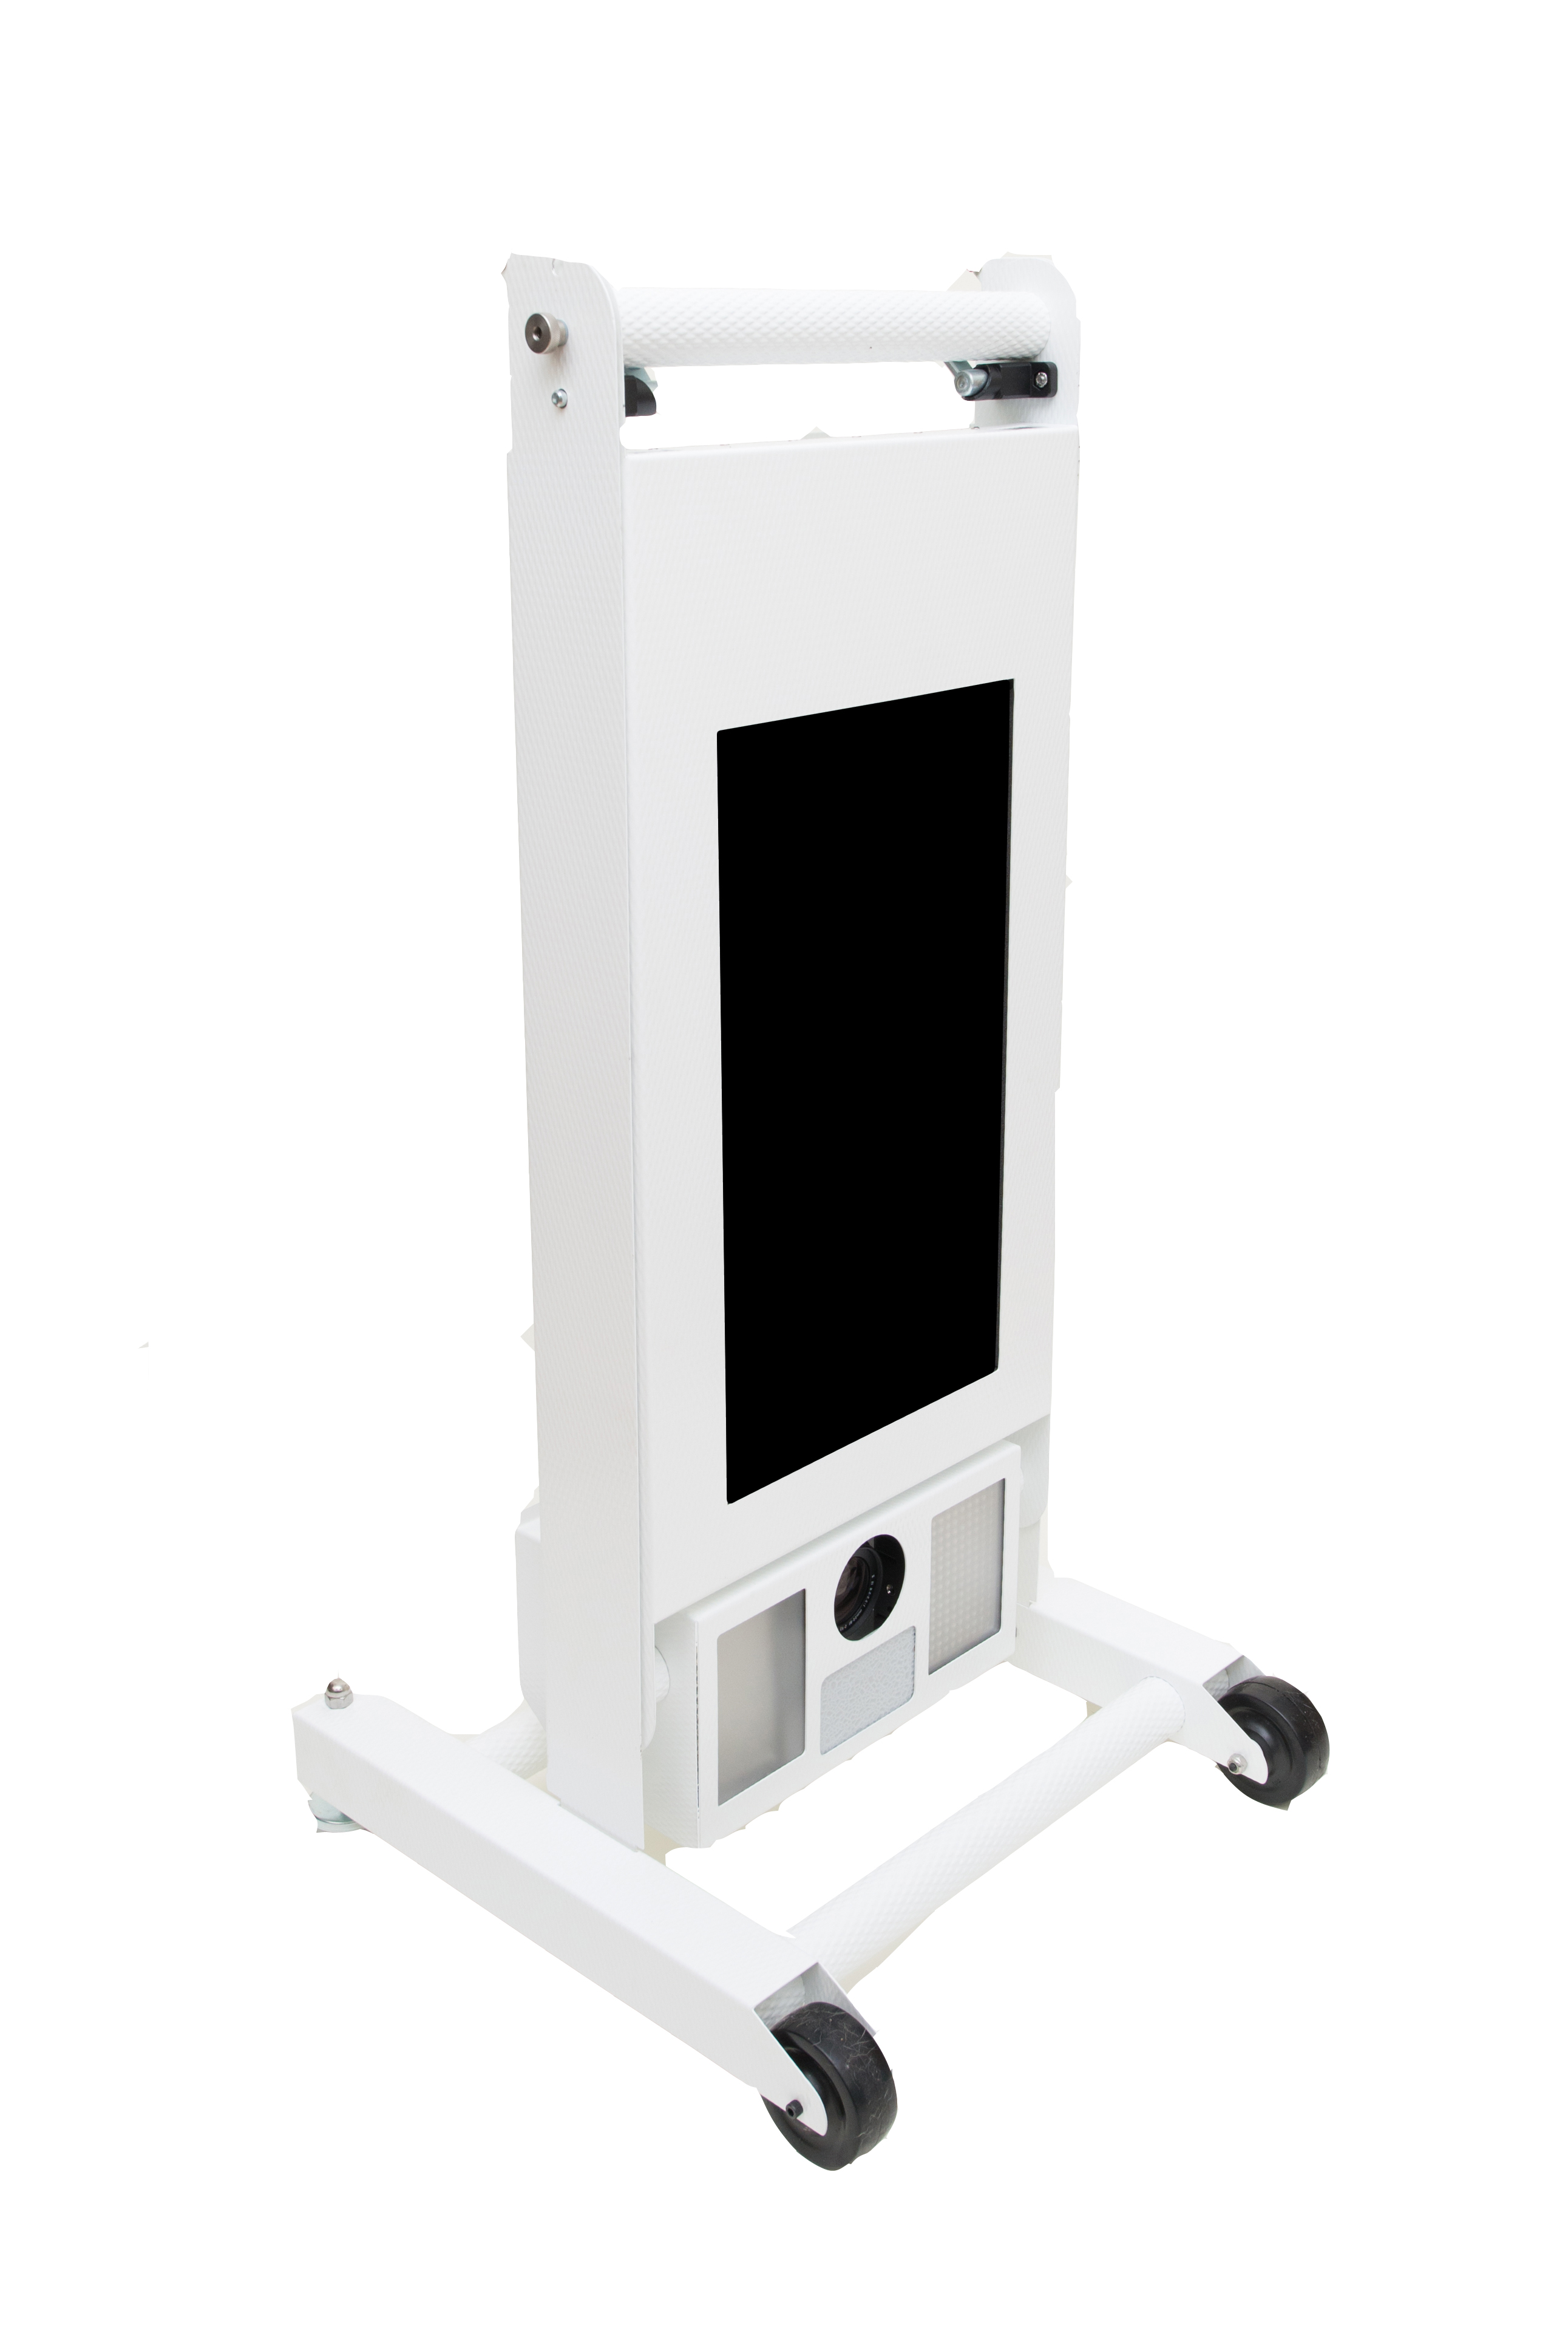 Photo Booth Kiosk For Sale White Folded